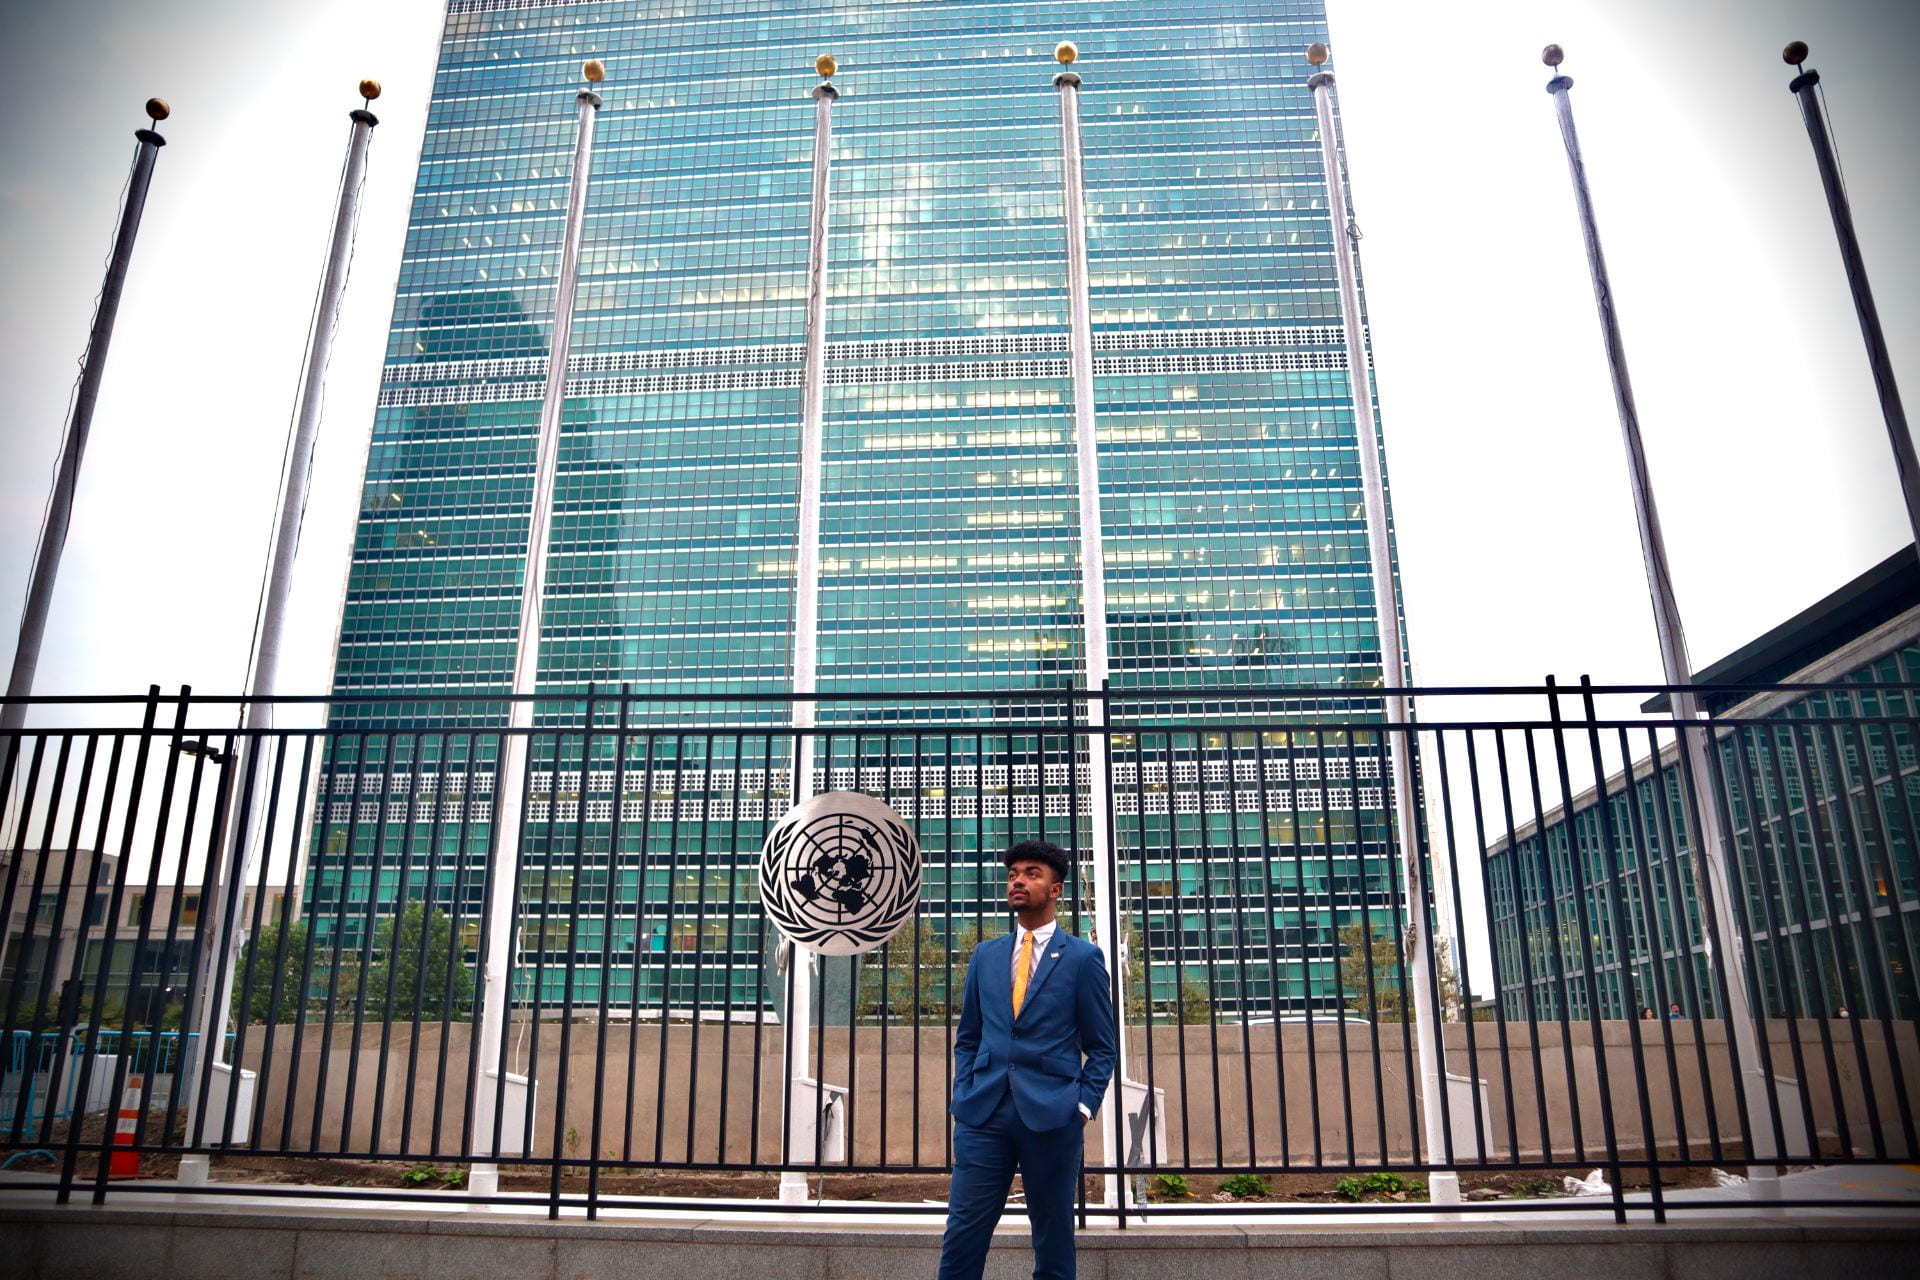 student standing in front of UN building